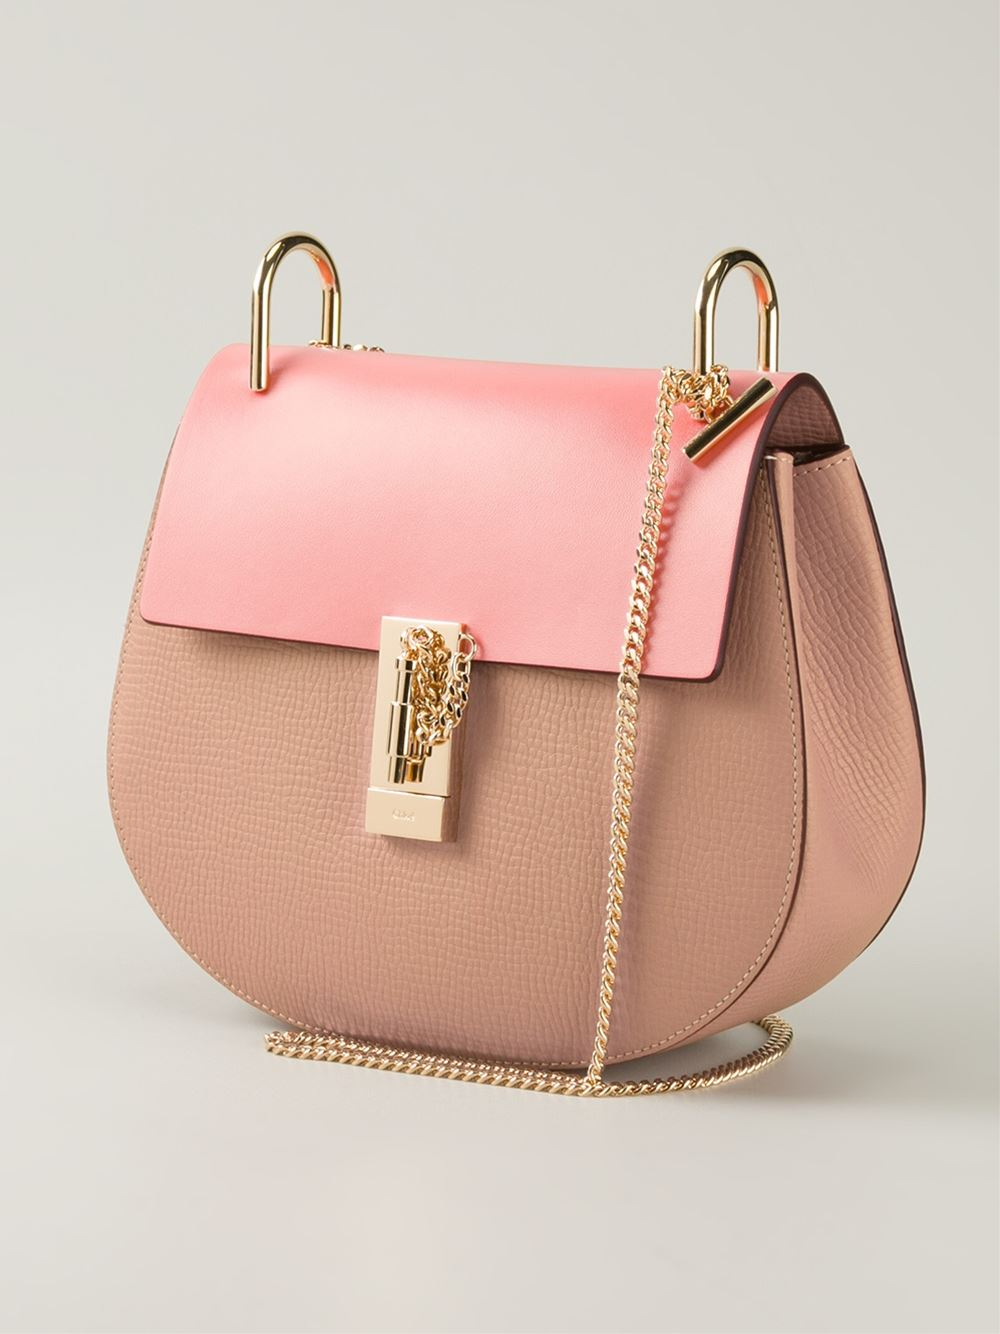 burberry baby bridle bag review